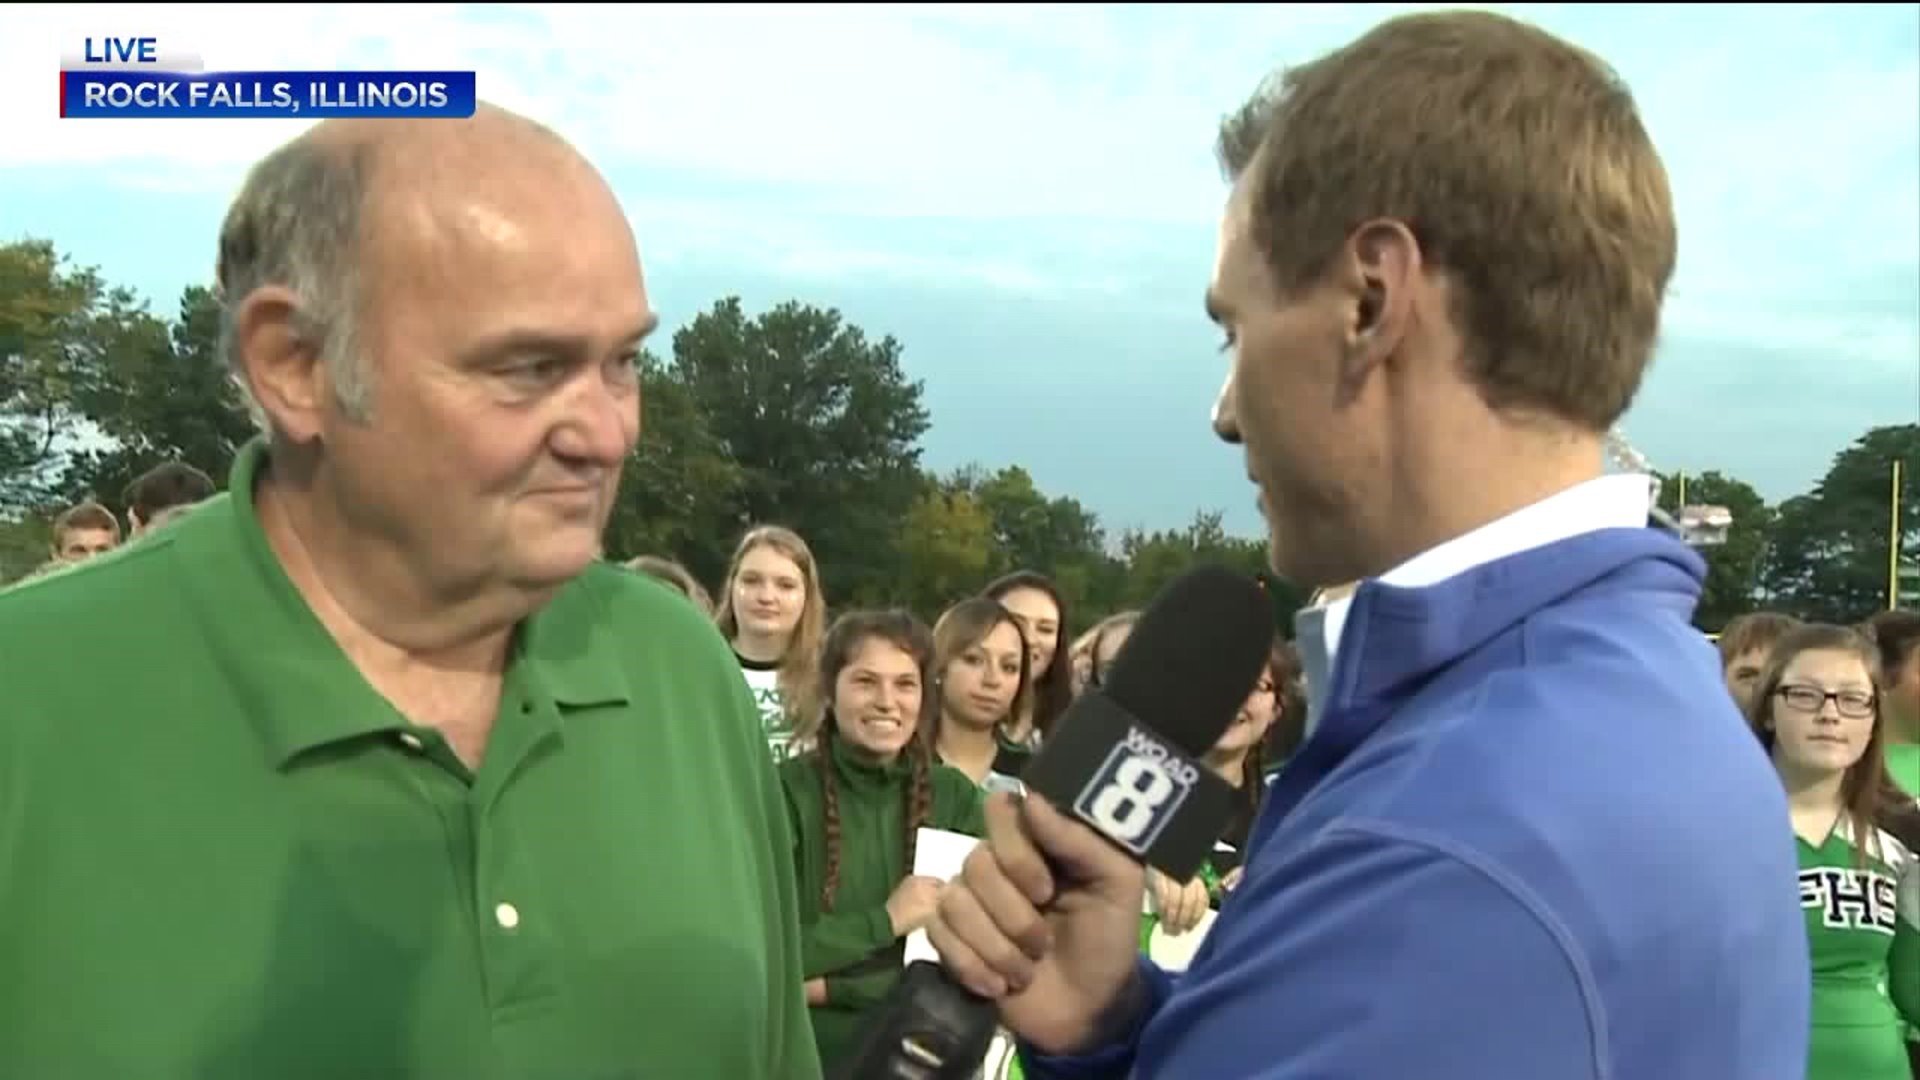 The Score Pre-Game Pep Rally: Rock Falls` Athletic Director Talks About Special School Spirit